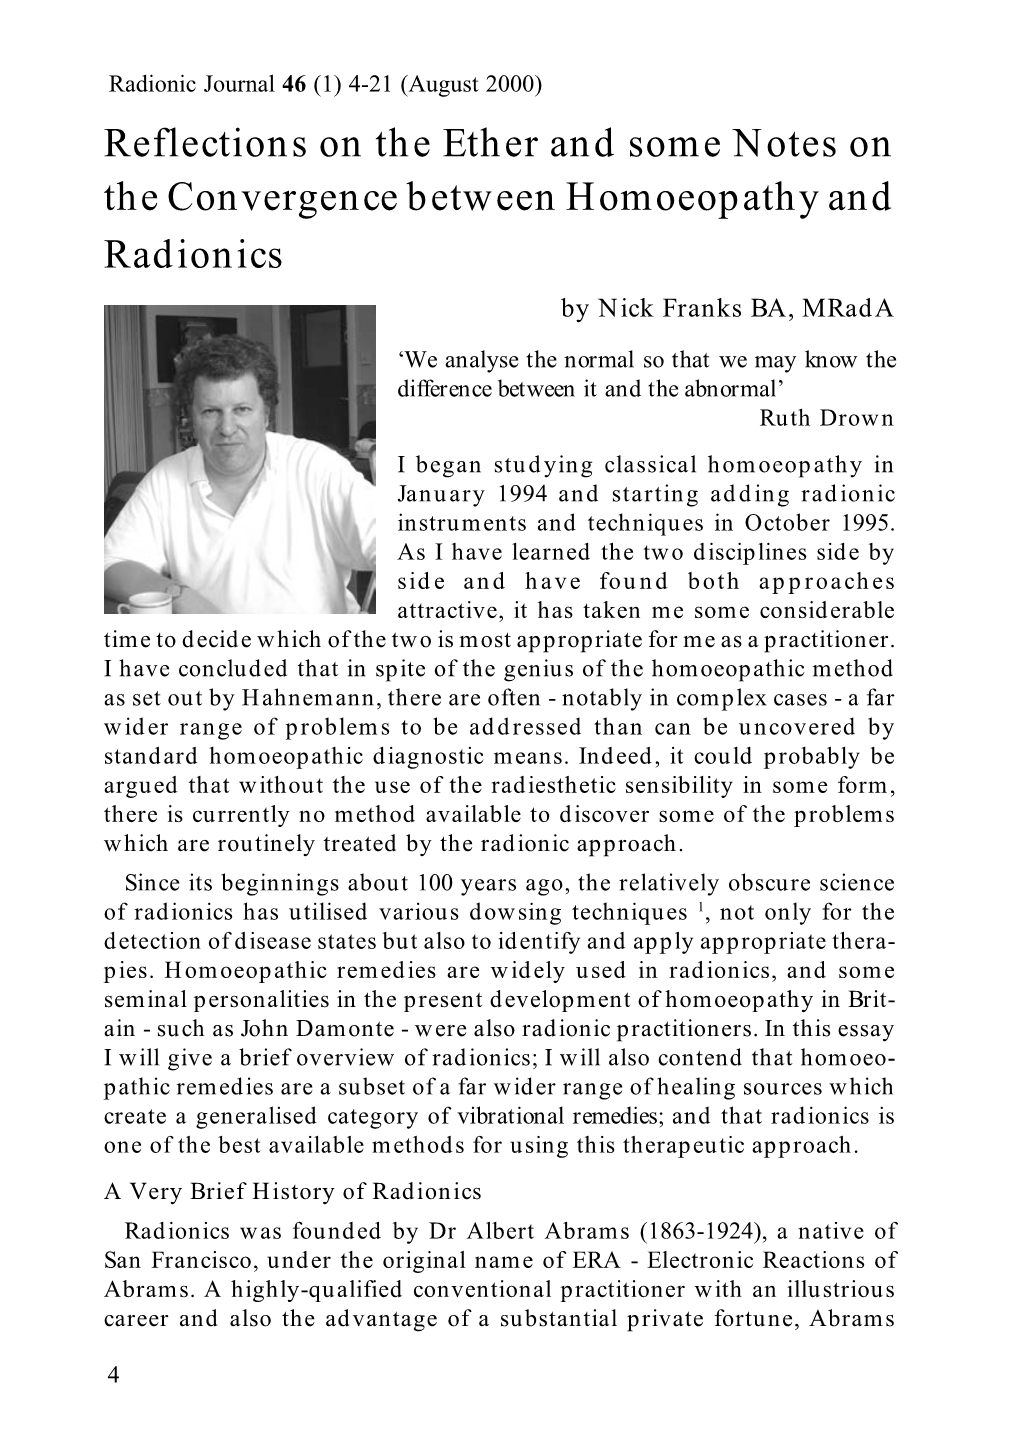 Reflections on the Ether and Some Notes on the Convergence Between Homoeopathy and Radionics by Nick Franks BA, Mrada